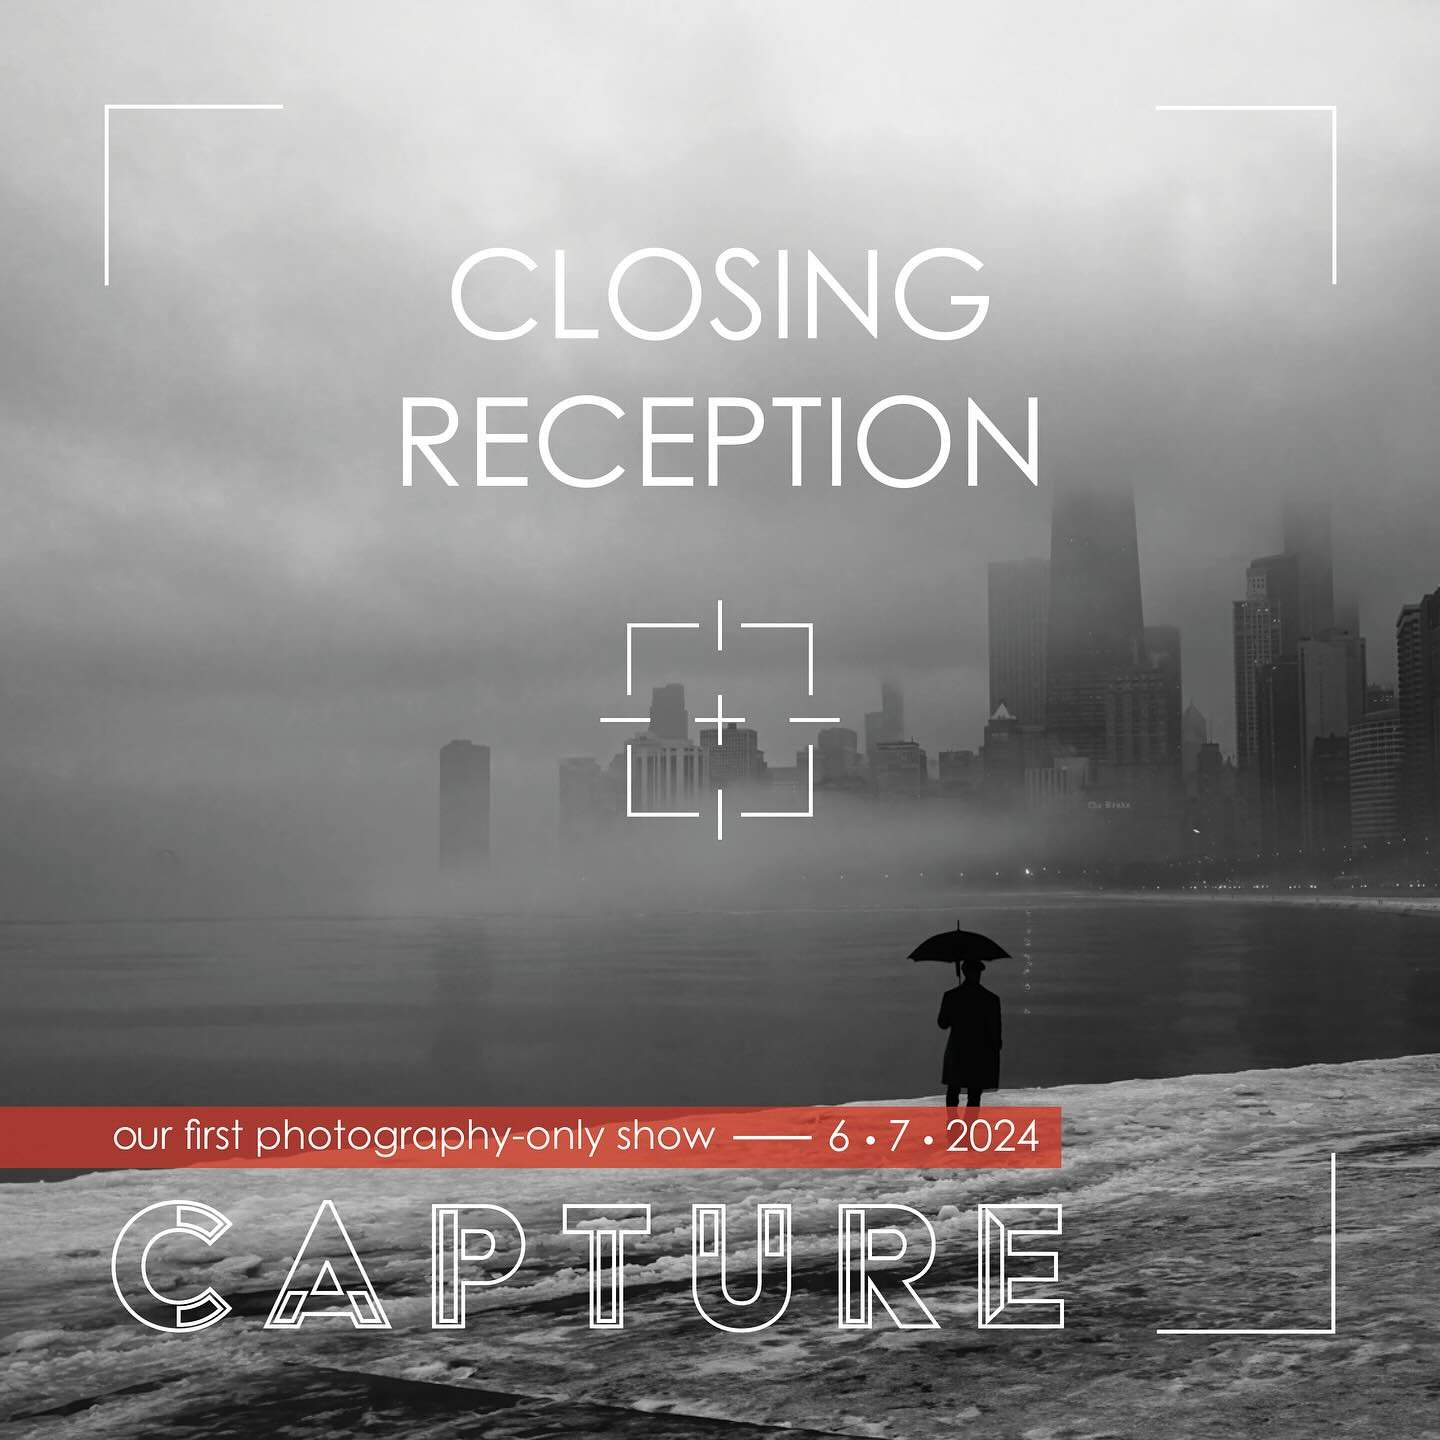 Come join us for our closing reception for our first ever photography-only exhibit, CAPTURE!

Visit us in Ukrainian Village on June 7th from 5 to 8 PM at 2623 W. Chicago Ave. Come see the show before we prepare for our next one, and for a chance to m